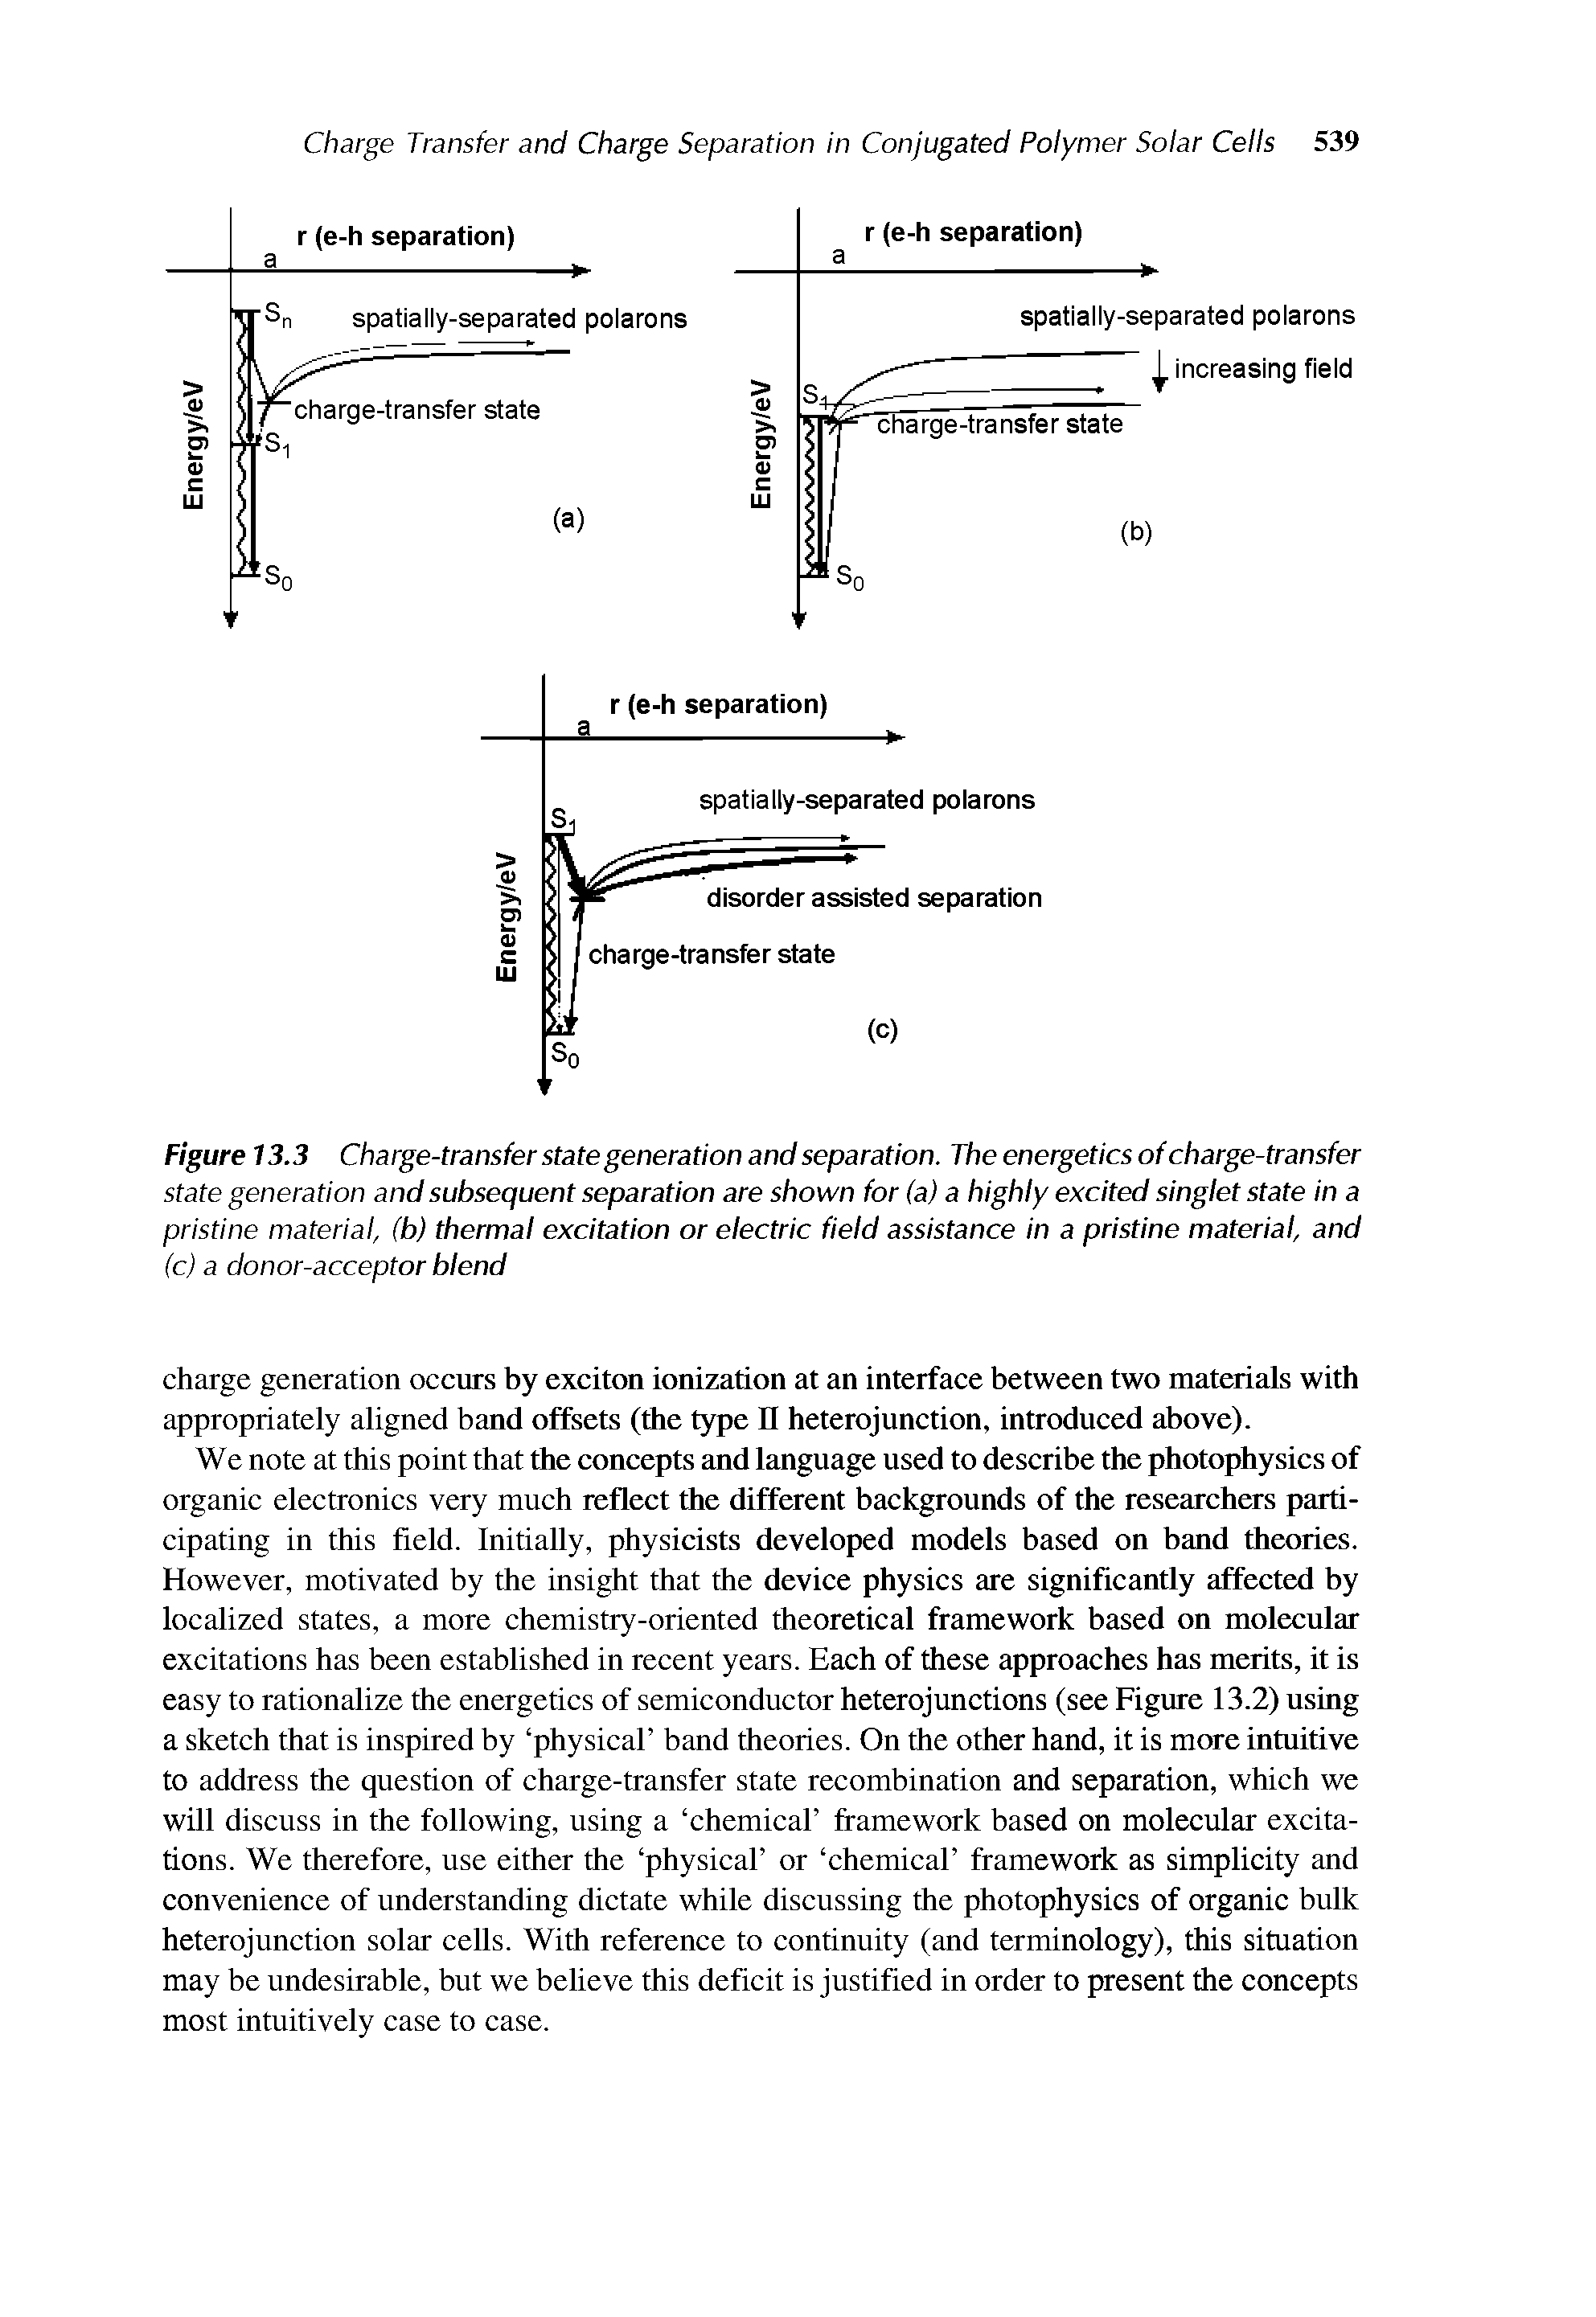 Figure 13.3 Charge-transfer state generation and separation. The energetics of charge-transfer state generation and subsequent separation are shown for (a) a highly excited singlet state in a pristine material, (b) thermal excitation or electric field assistance in a pristine material, and...